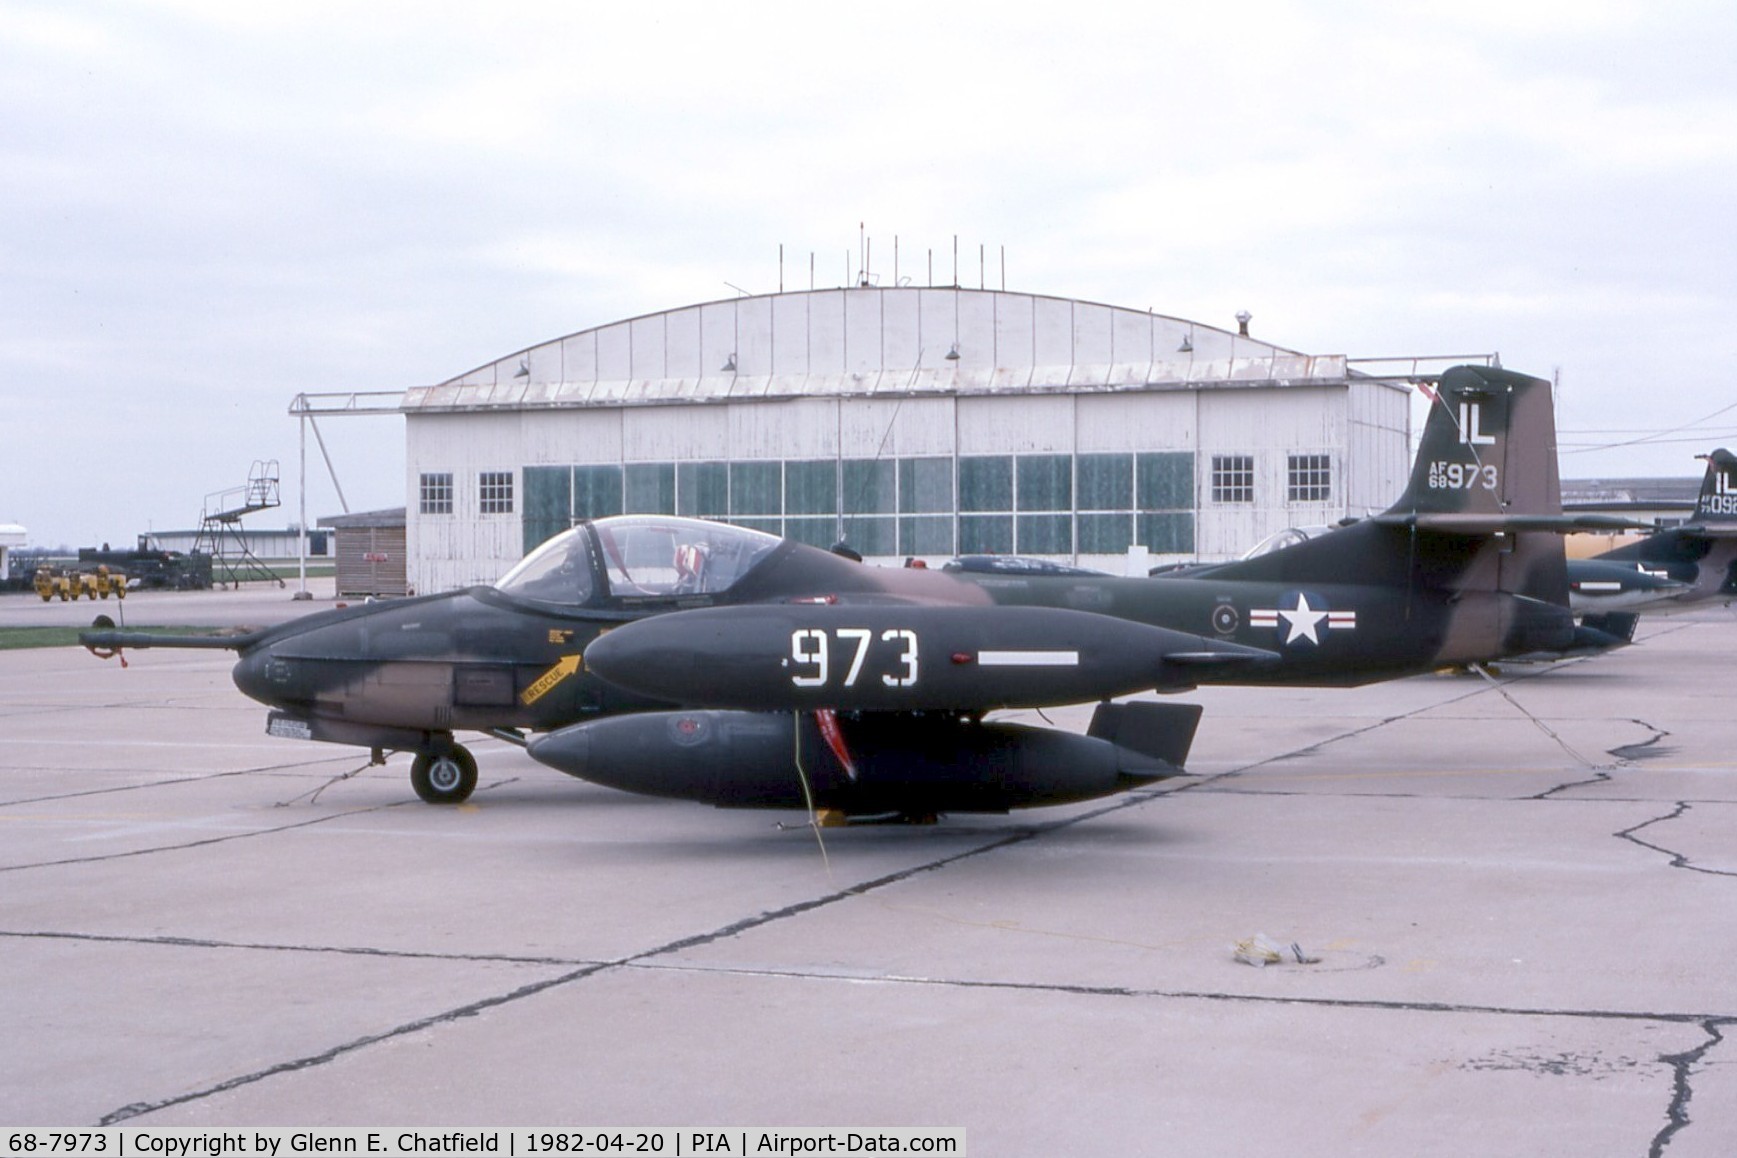 68-7973, 1968 Cessna OA-37B Dragonfly C/N 43120, OA-37B with the Illinois ANG